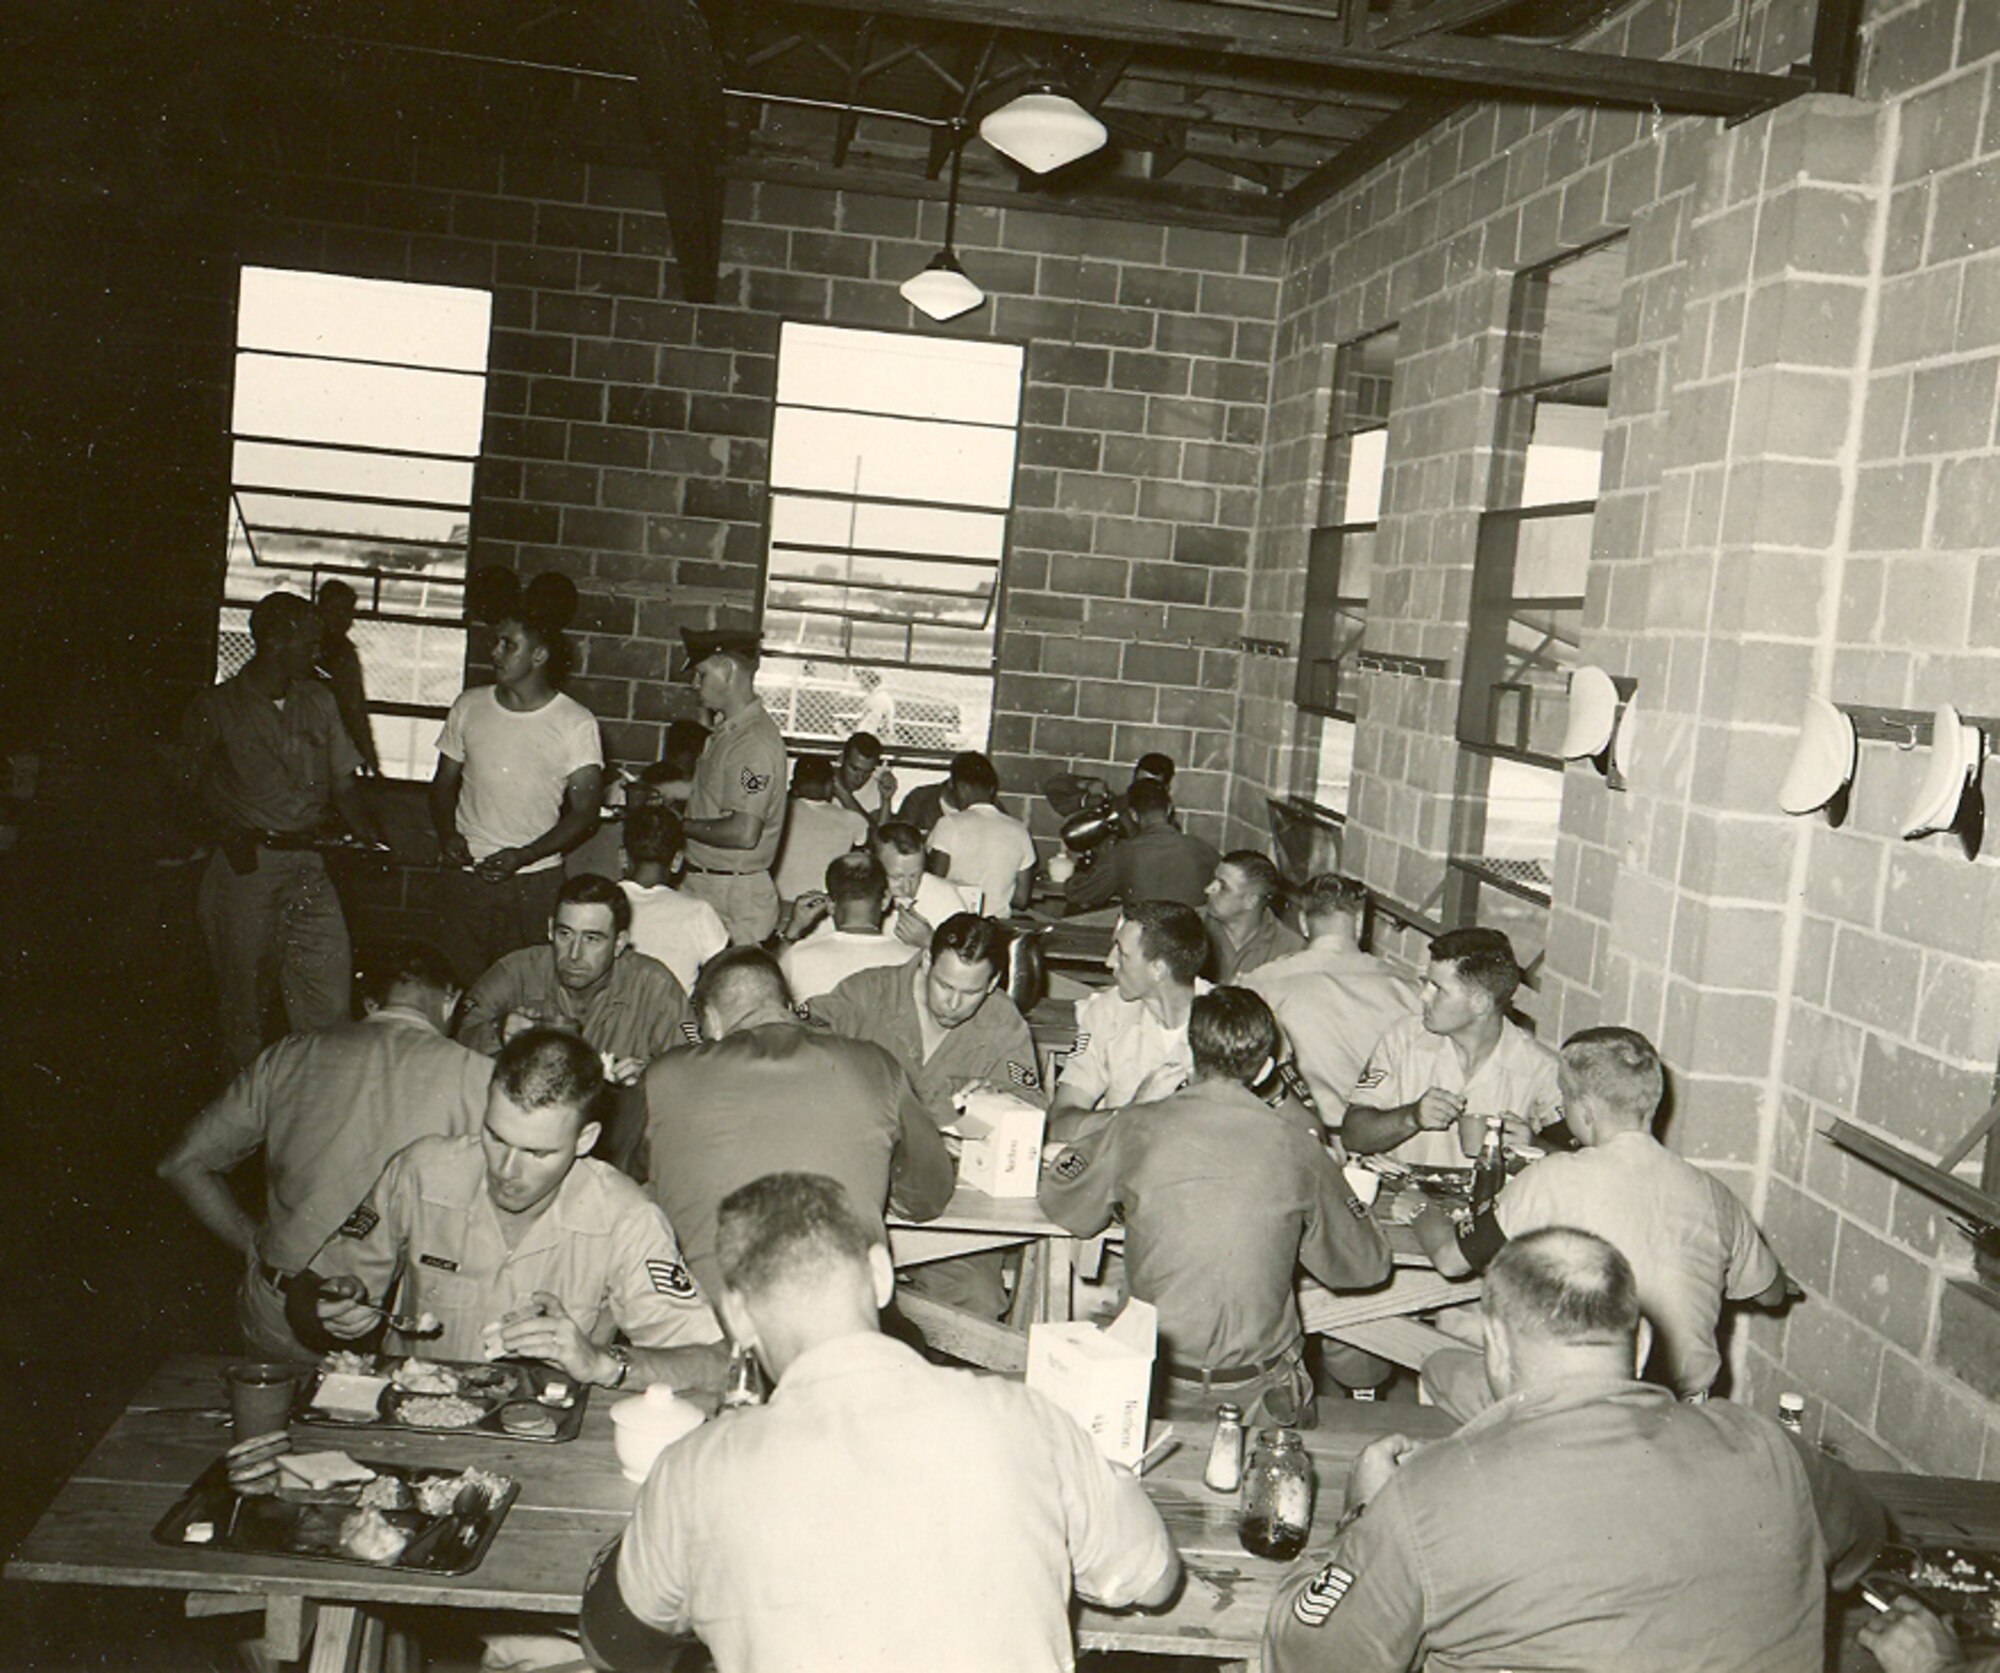 This photo was taken in 1958 of the dining area of the building used at Hutchinson during the very early days of the 190th’s history.